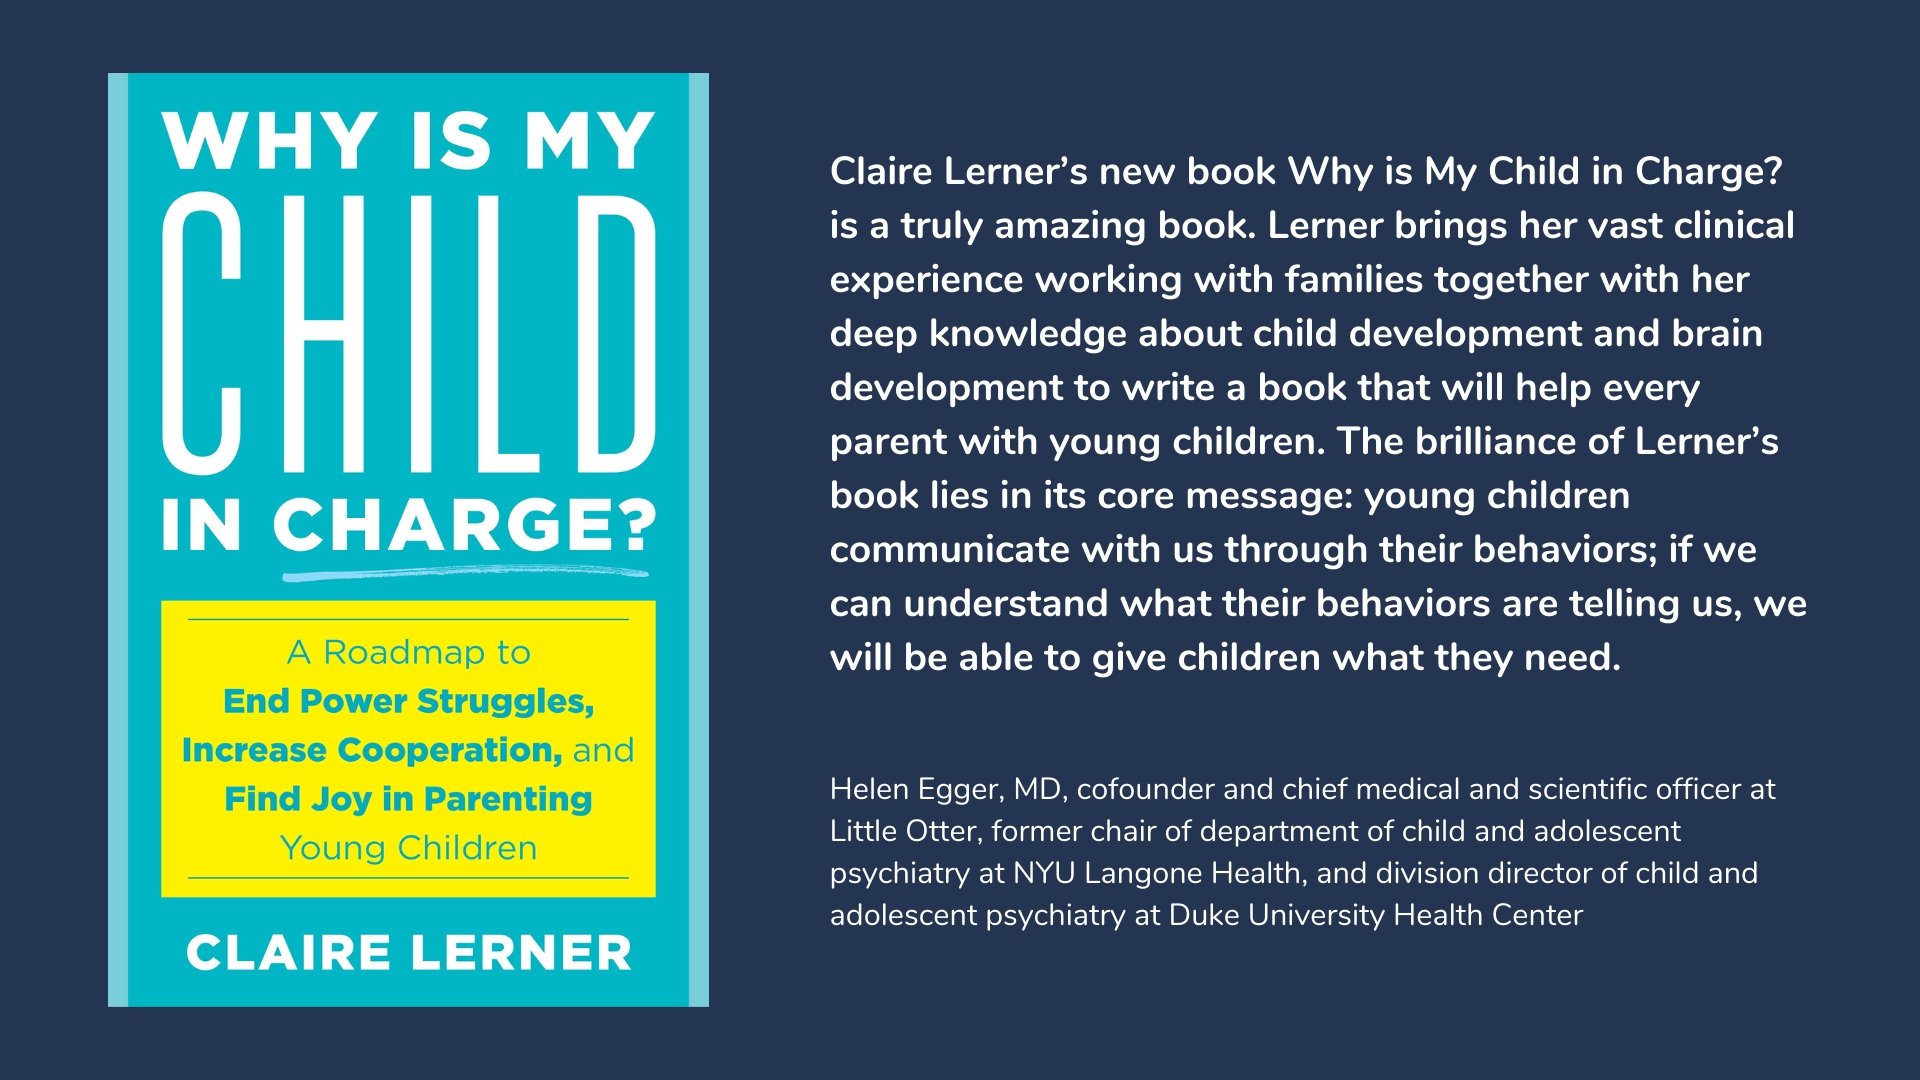 Why Is My Child in Charge?, book cover and description.